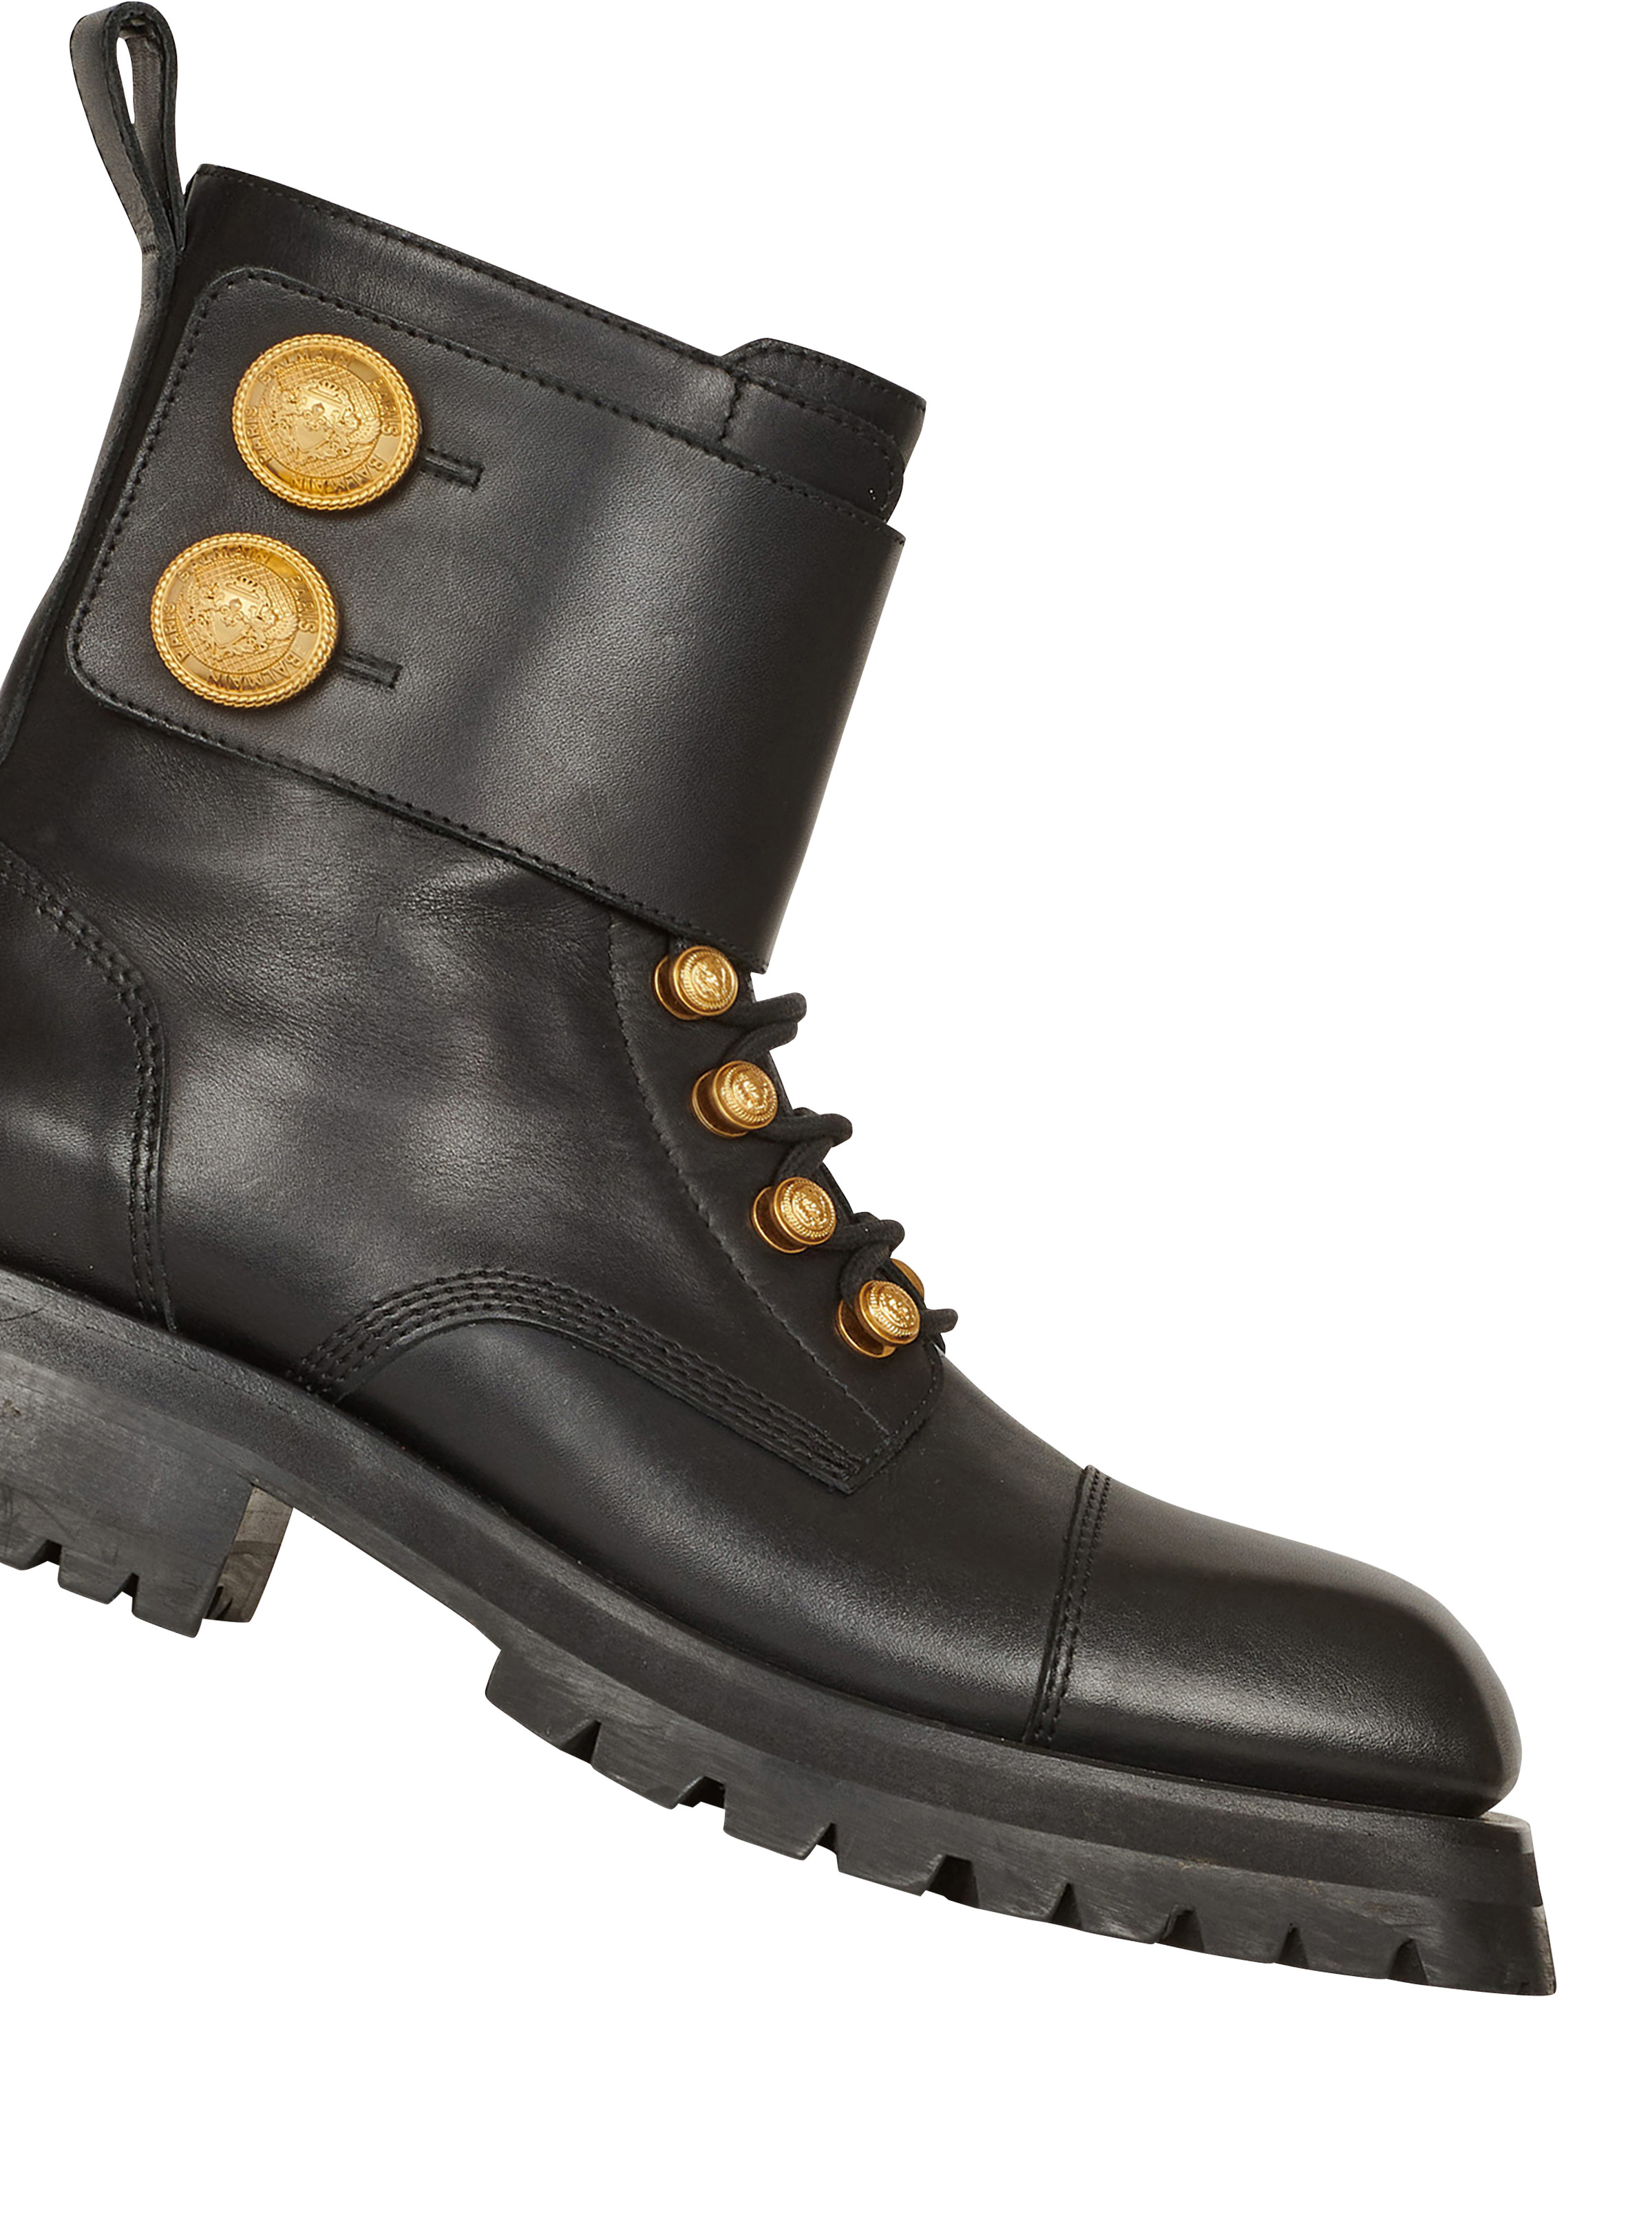 Ranger Army leather ankle boots - 5